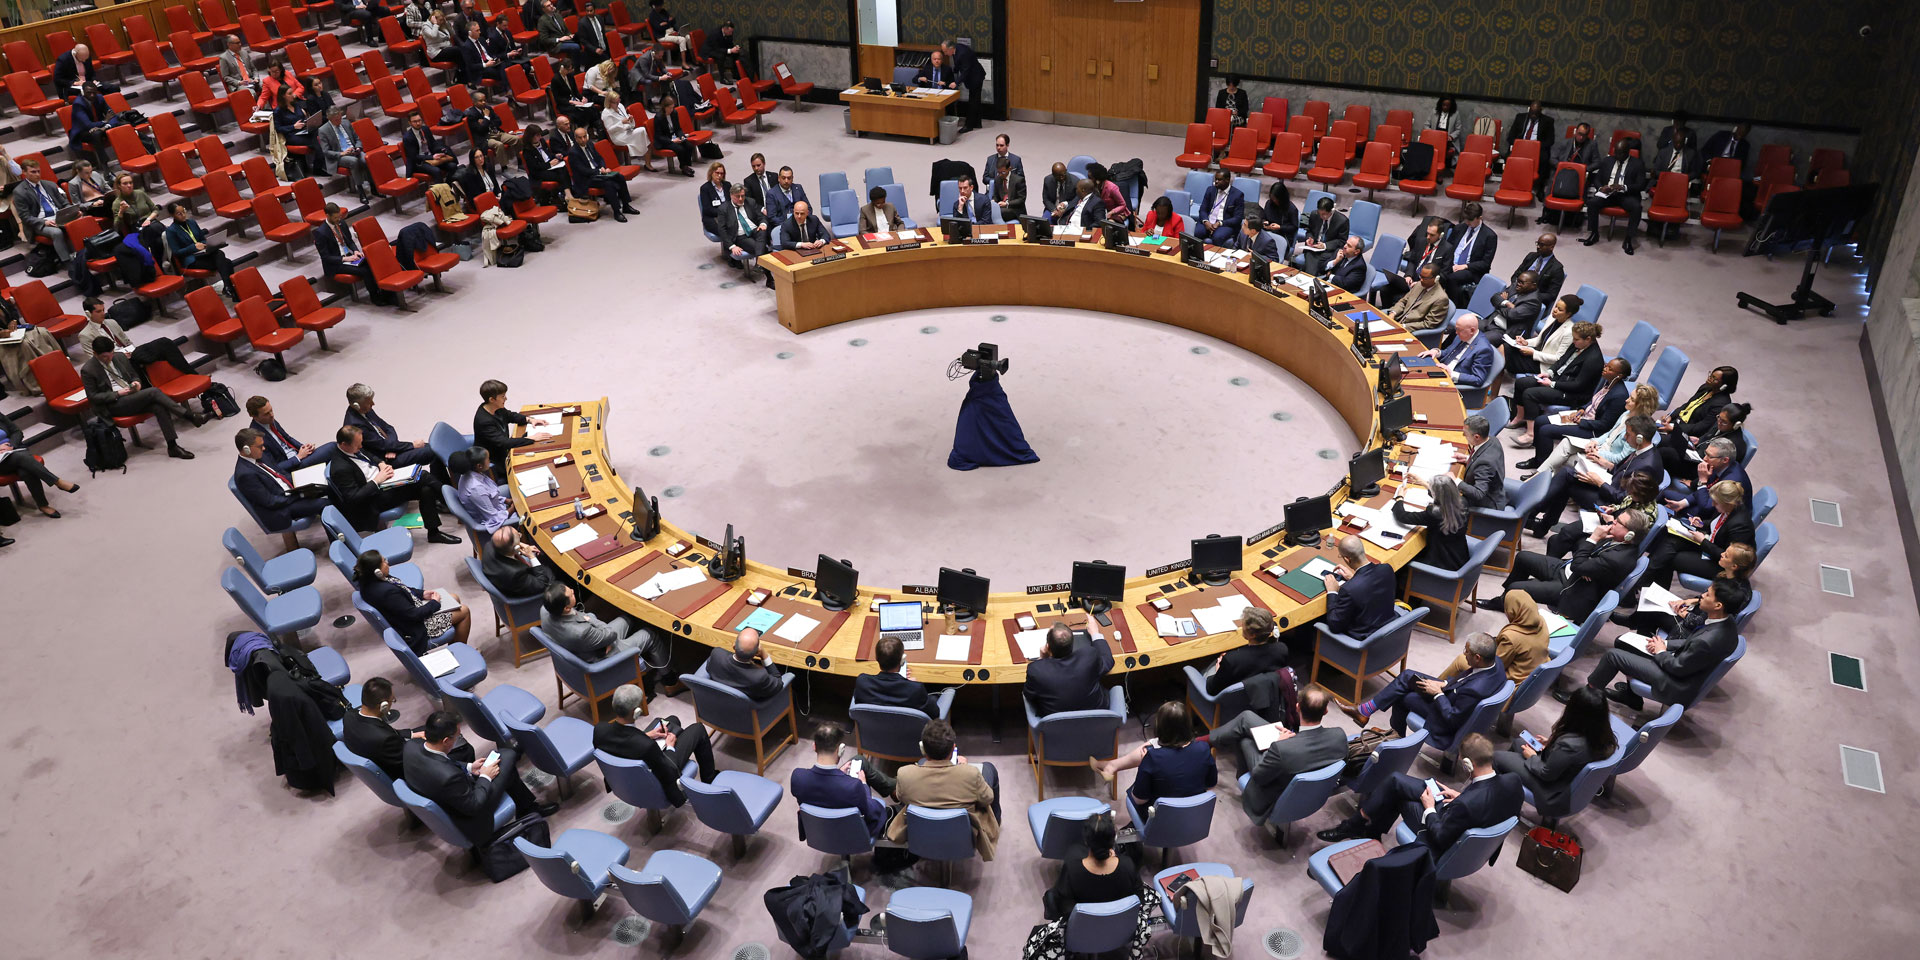 Representatives of the member states in the UN Security Council sit at the horseshoe-shaped table at a debate chaired by Federal Councillor Cassis on 3 May 2023.